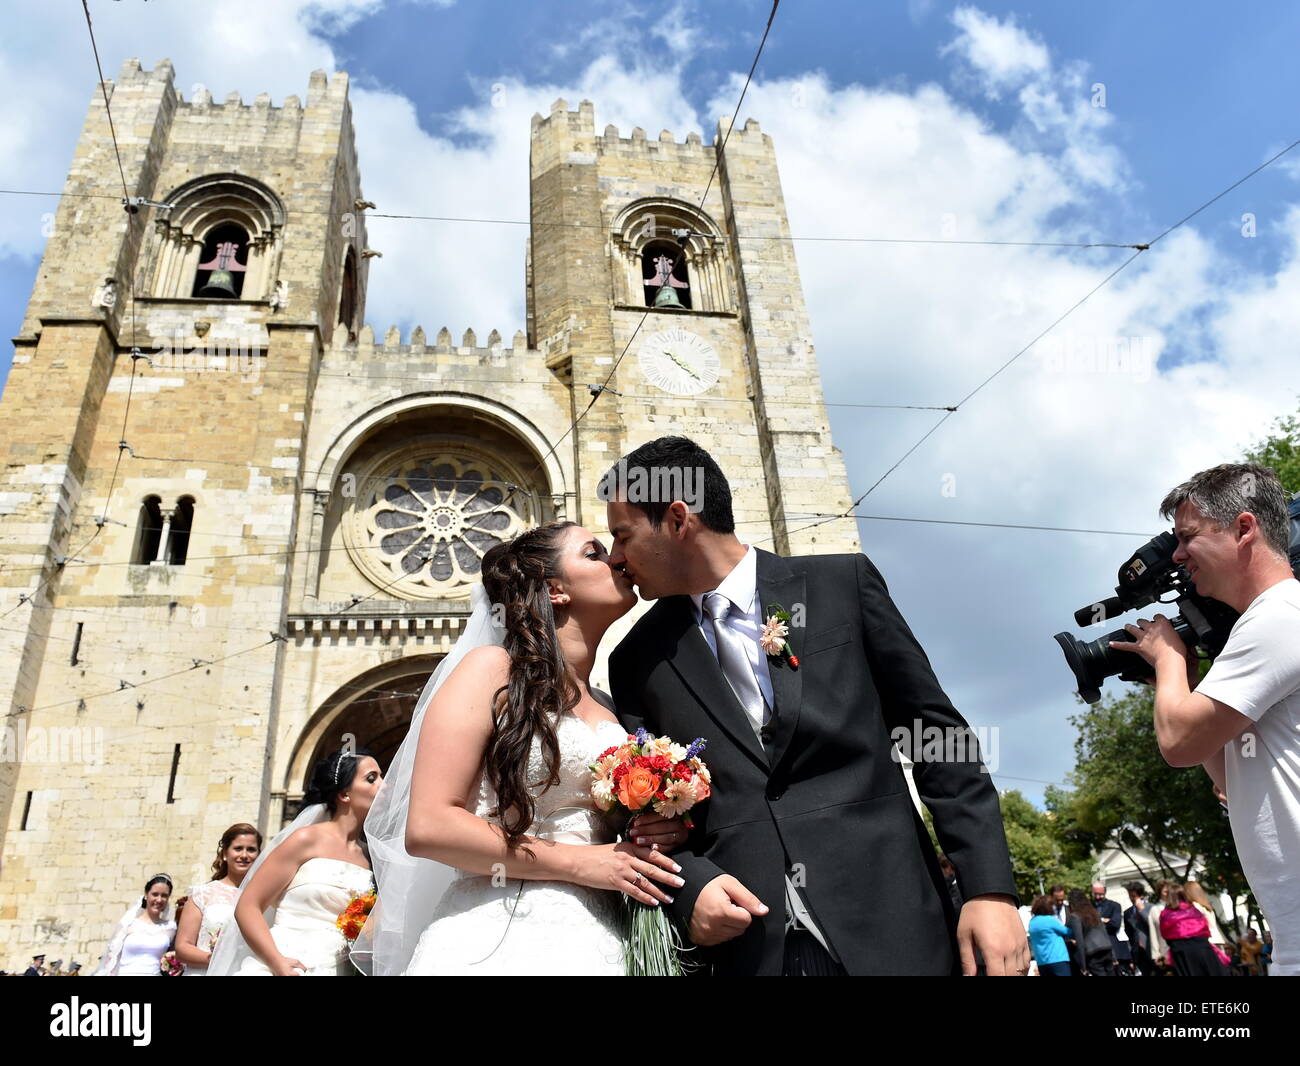 (150613) -- LISBON, June 13, 2015 (Xinhua) -- A couple of newly-weds kiss during a group wedding in Lisbon, Portugal, on June 12, 2015. A total of 11 couples married during a group wedding at Lisbon city cathedral Friday. (Xinhua/Zhang Liyun) (zhf) Stock Photo